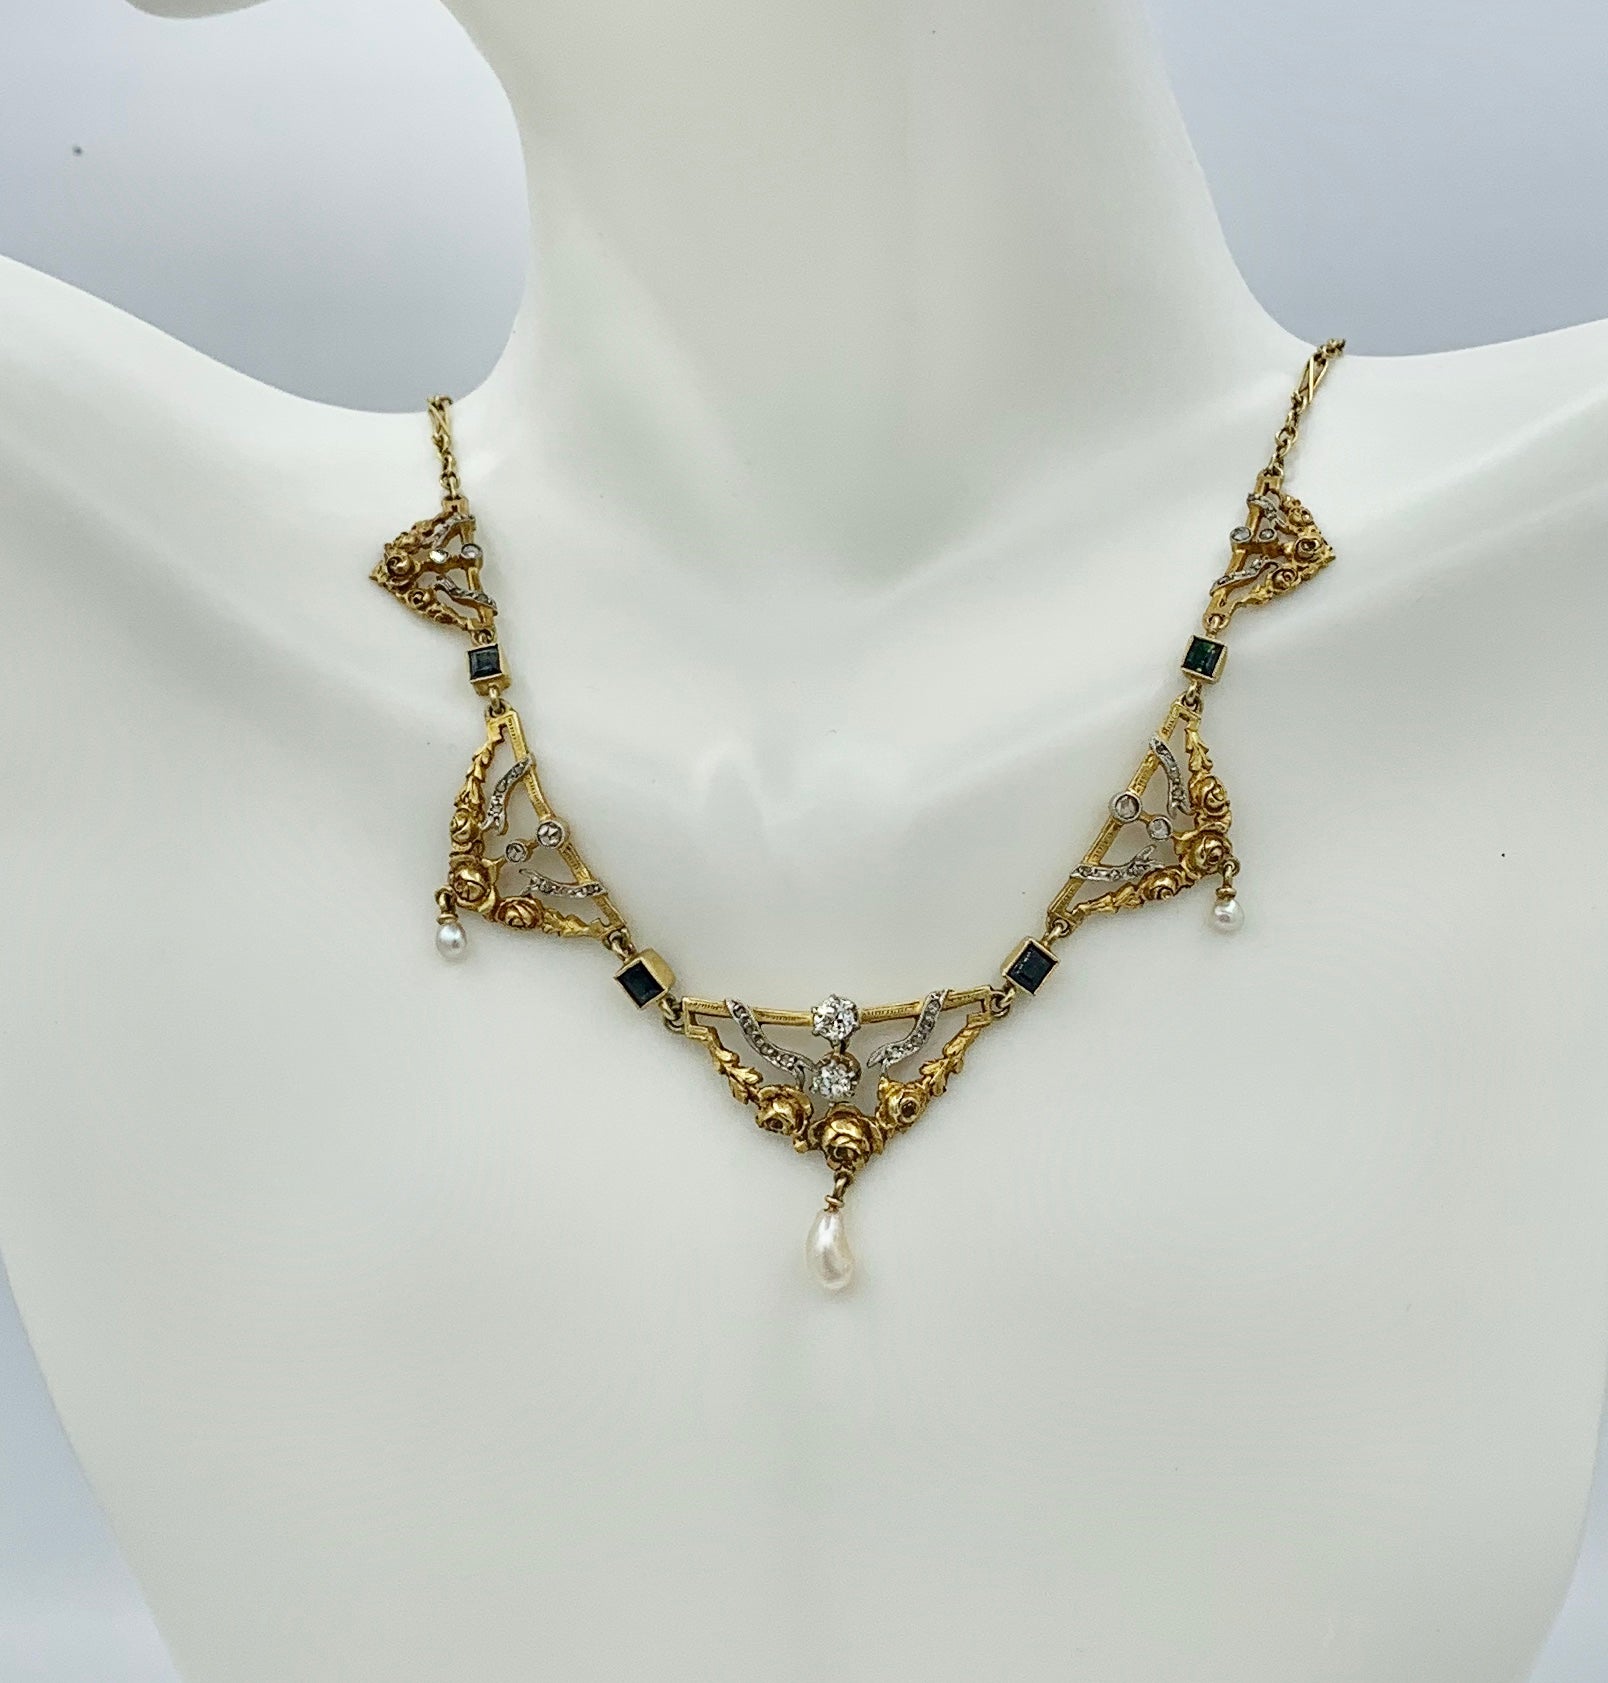 THIS IS A STUNNING ANTIQUE OLD MINE CUT AND ROSE CUT DIAMOND, SAPPHIRE AND PEARL MUSEUM QUALITY FRENCH BEAUX ARTS, NAPOLEON III, BELLE EPOQUE NECKLACE IN 18 KARAT GOLD.  THE GORGEOUS NECKLACE FROM FRANCE HAS A STUNNING ROSE FLOWER GARLAND WREATH